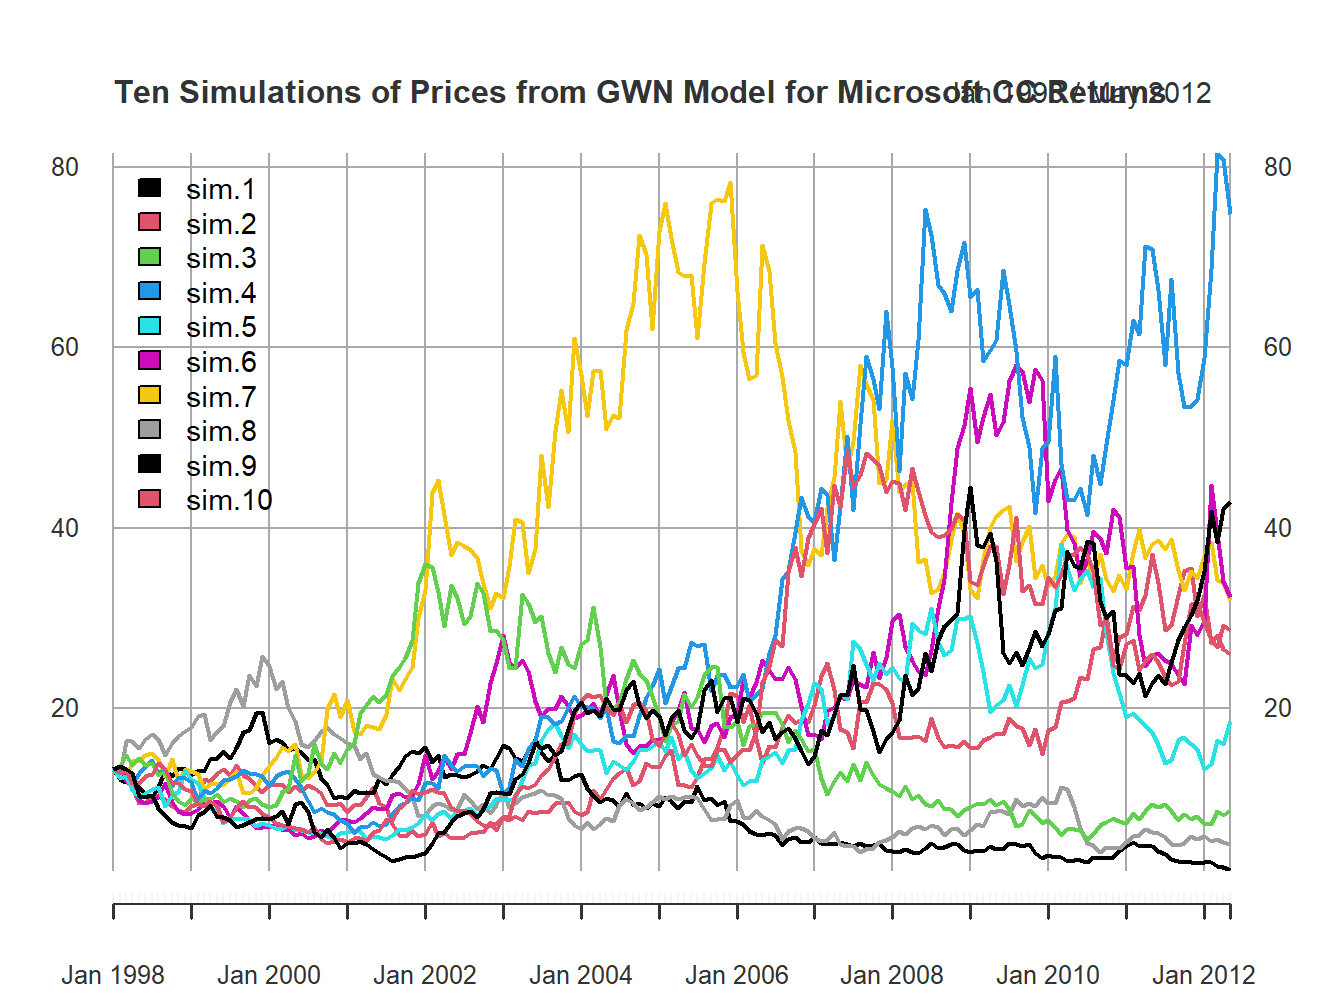 Ten Price Simulations from GWN Model for Microsoft CC Returns.